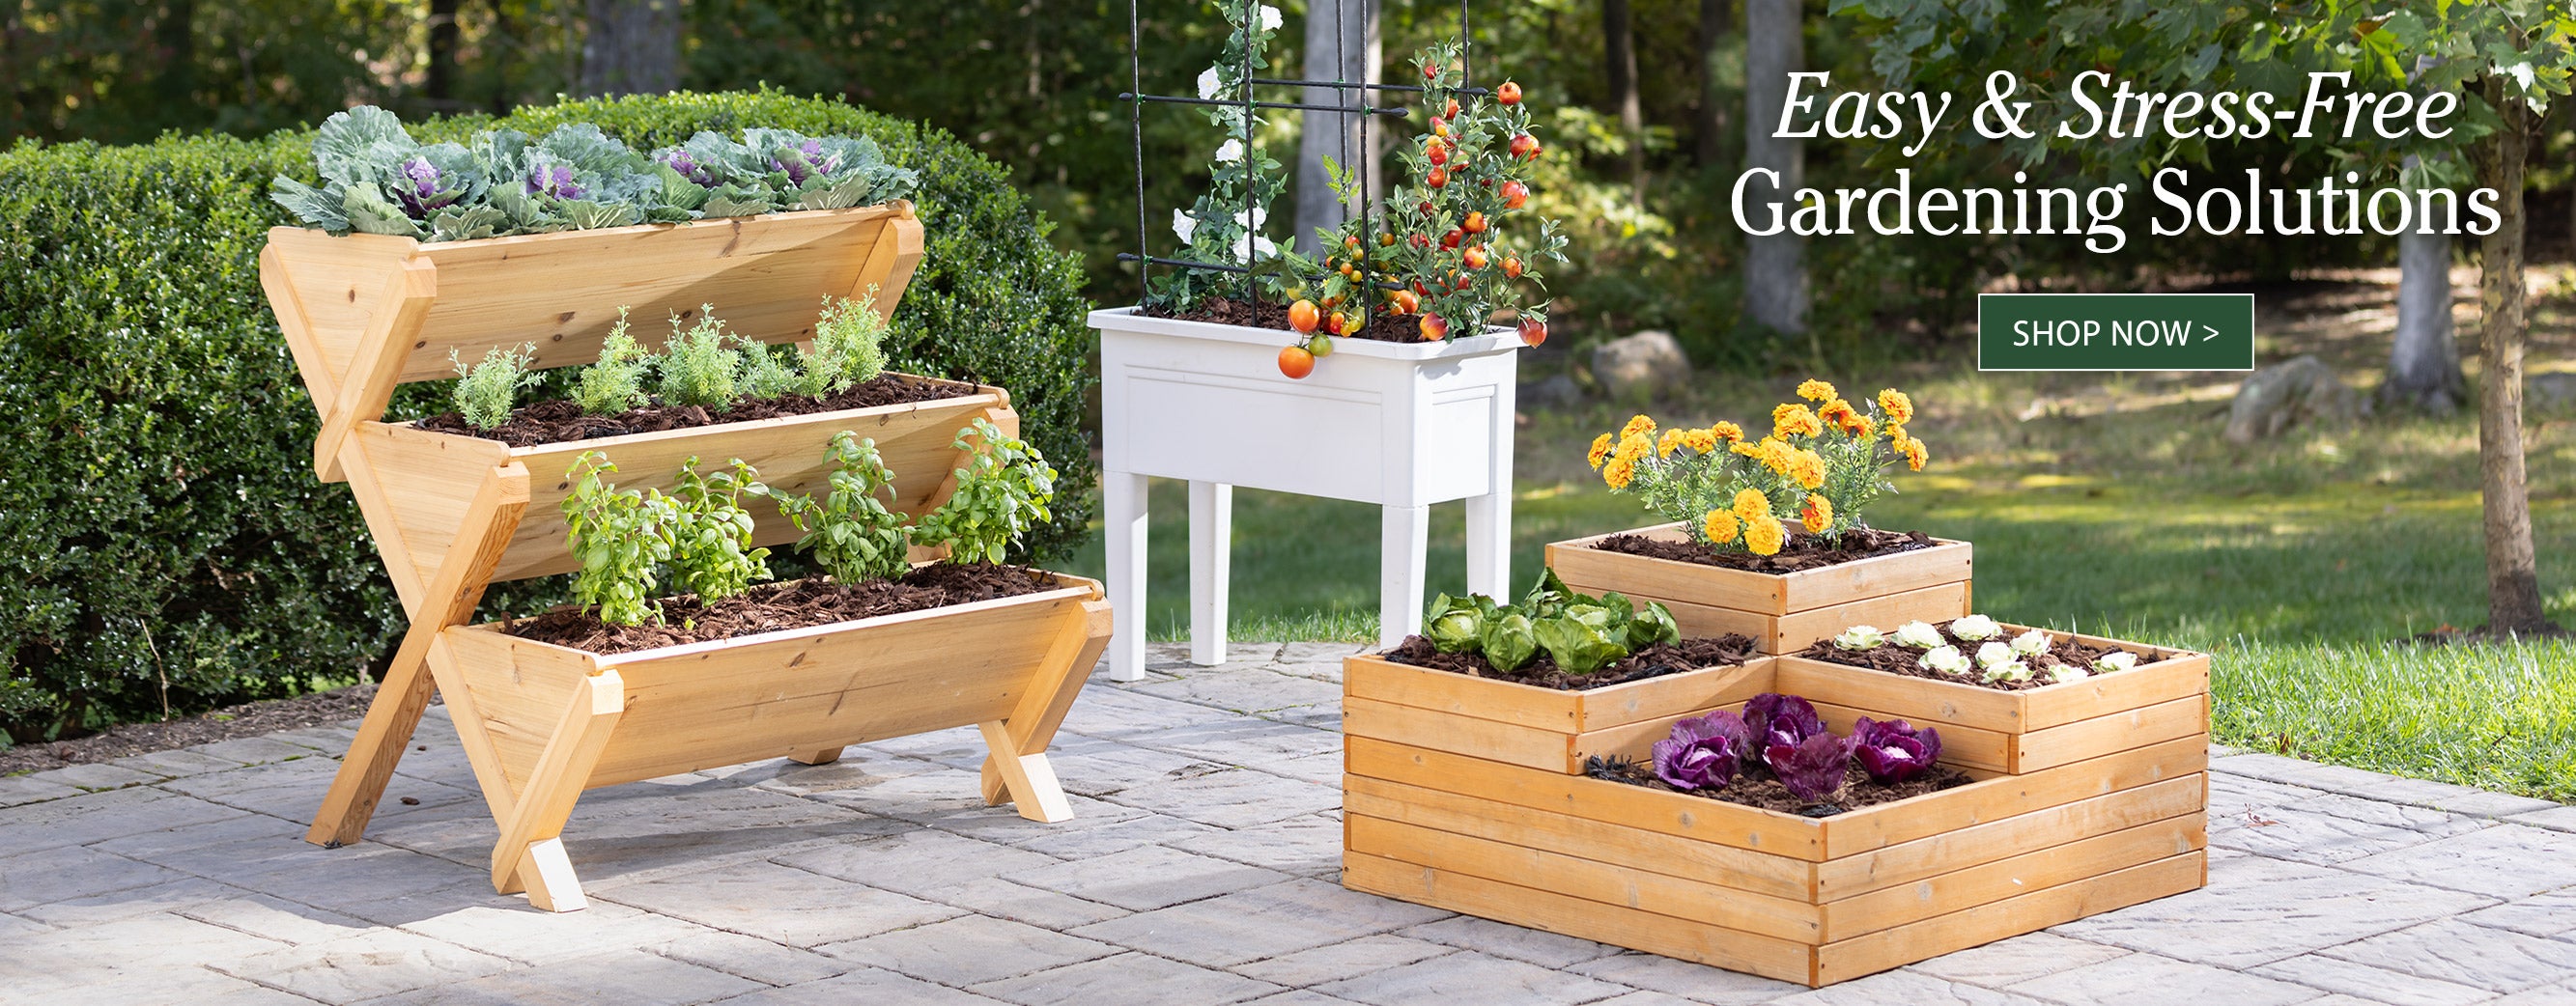 Image of three planters on patio. Easy & Stress-Free Gardening Solutions SHOP NOW